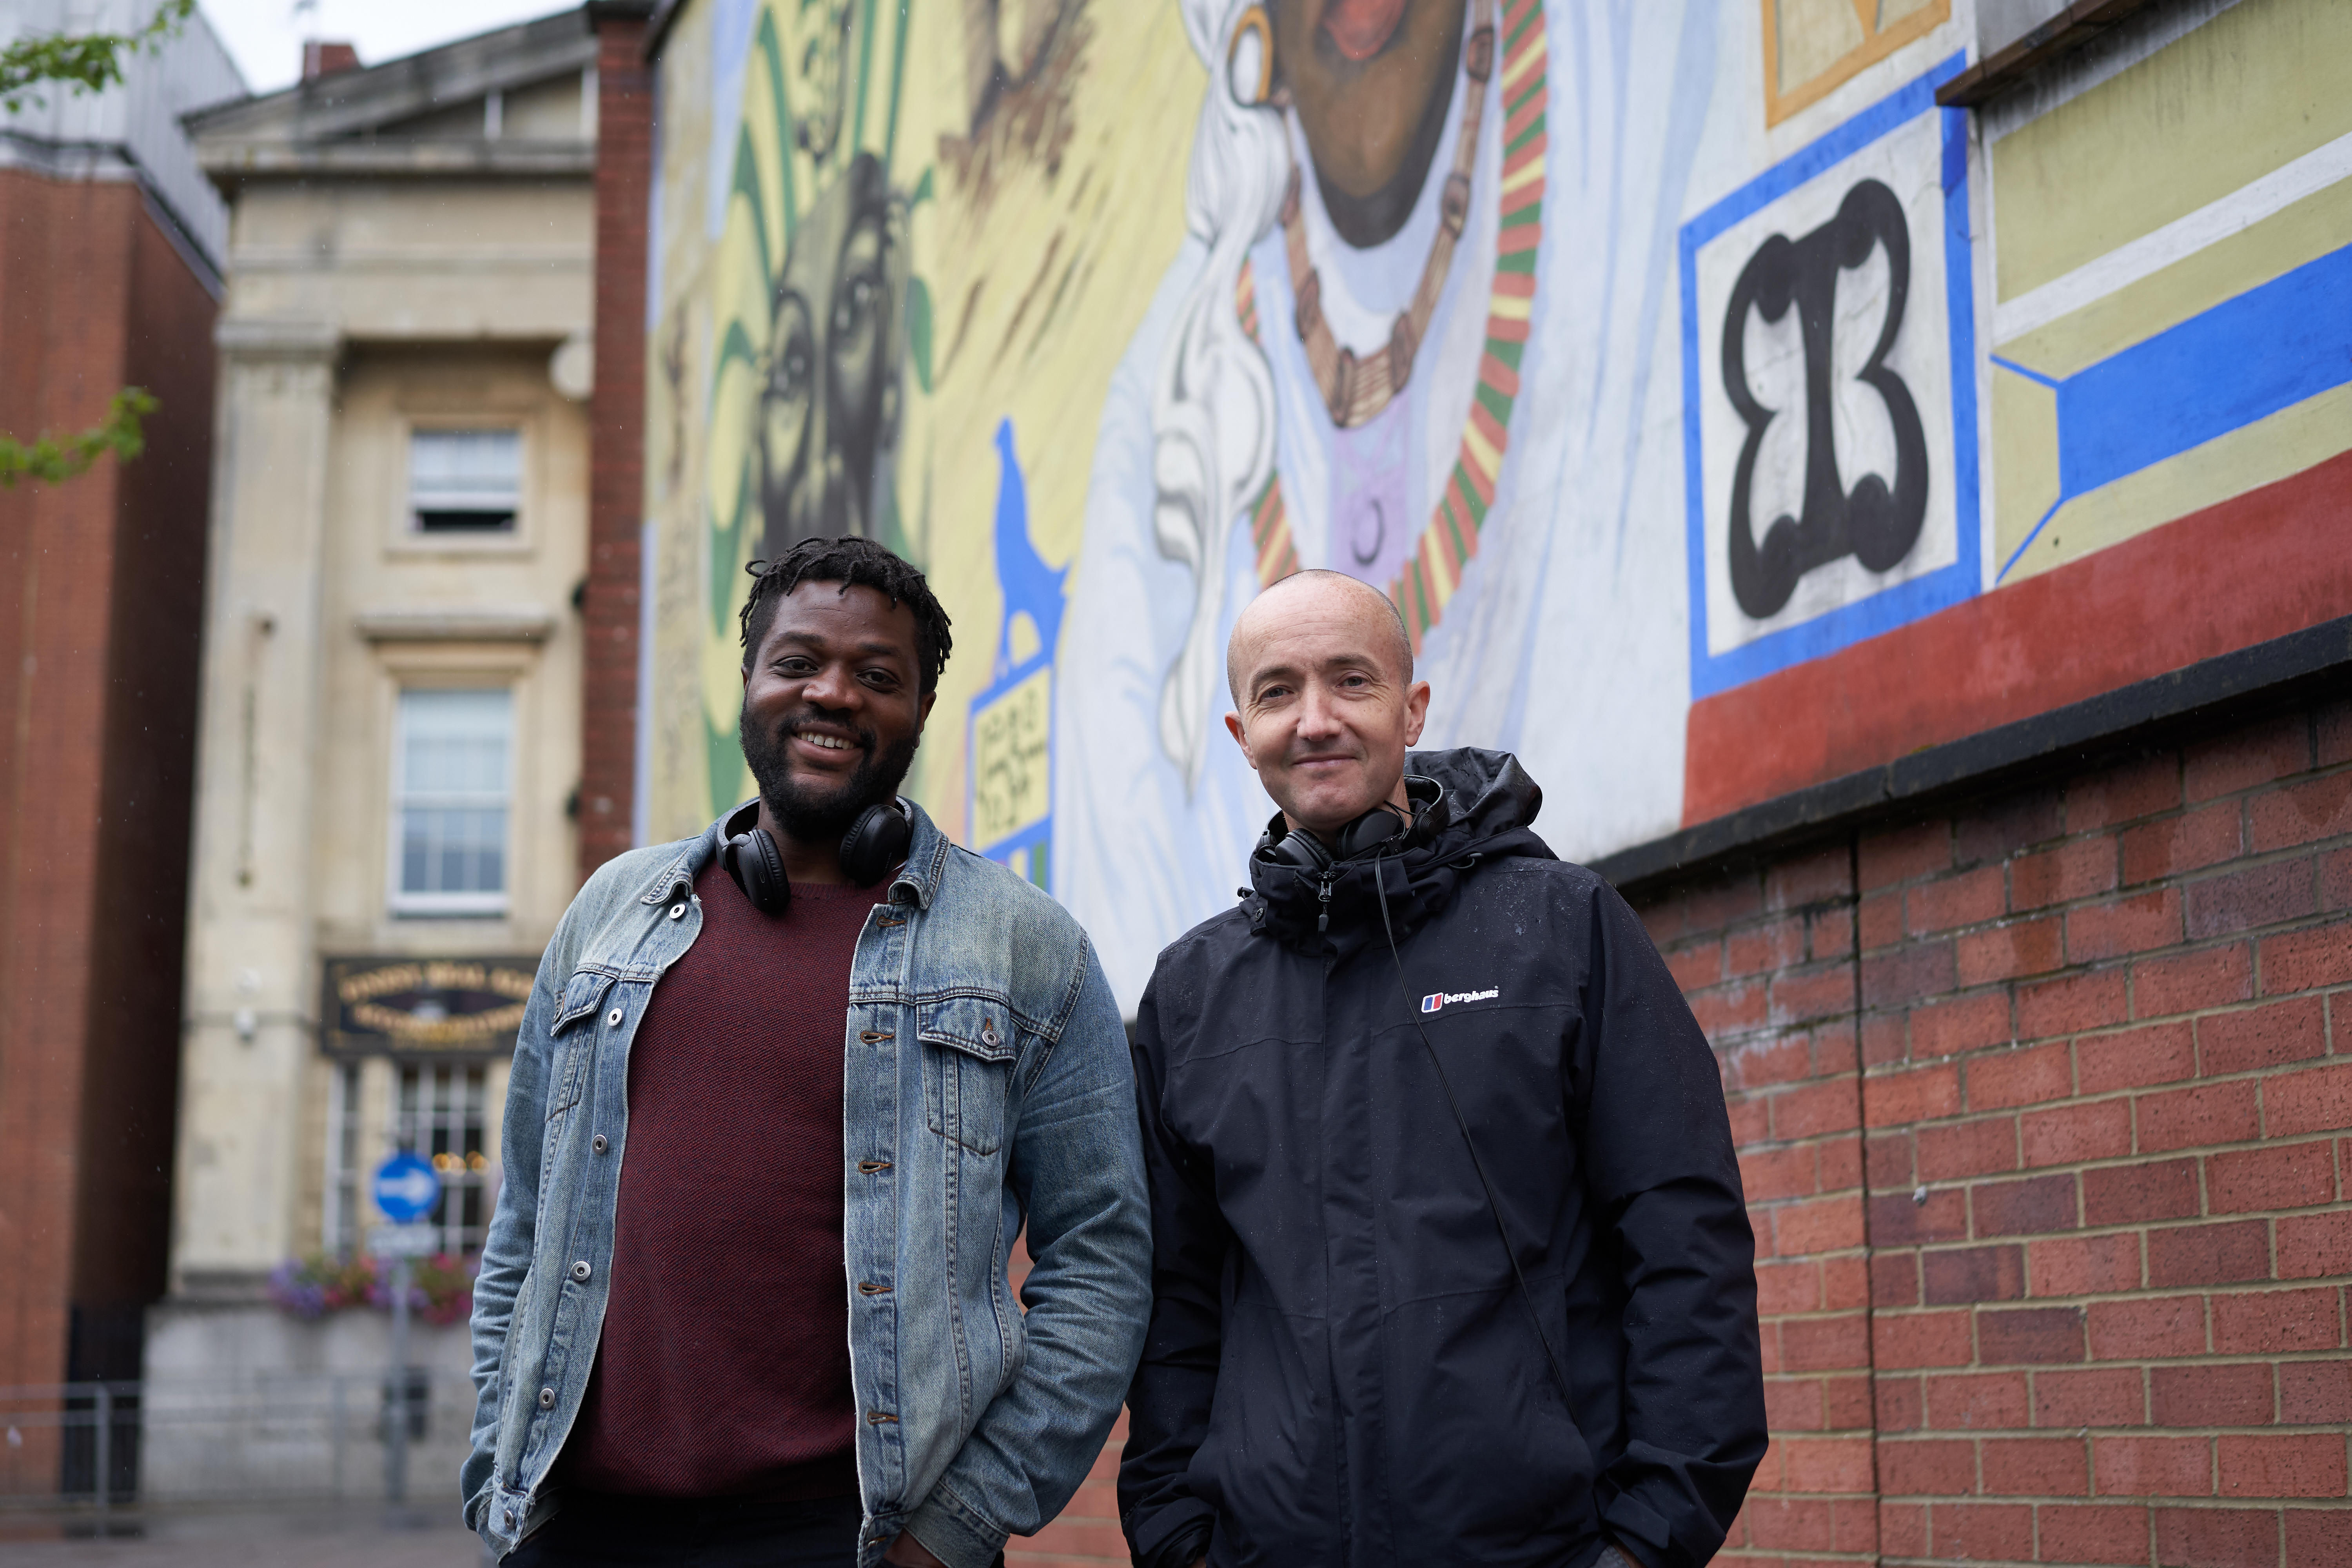 Aundre Goddard and Richard Bentley stood in front of the Central Club mural